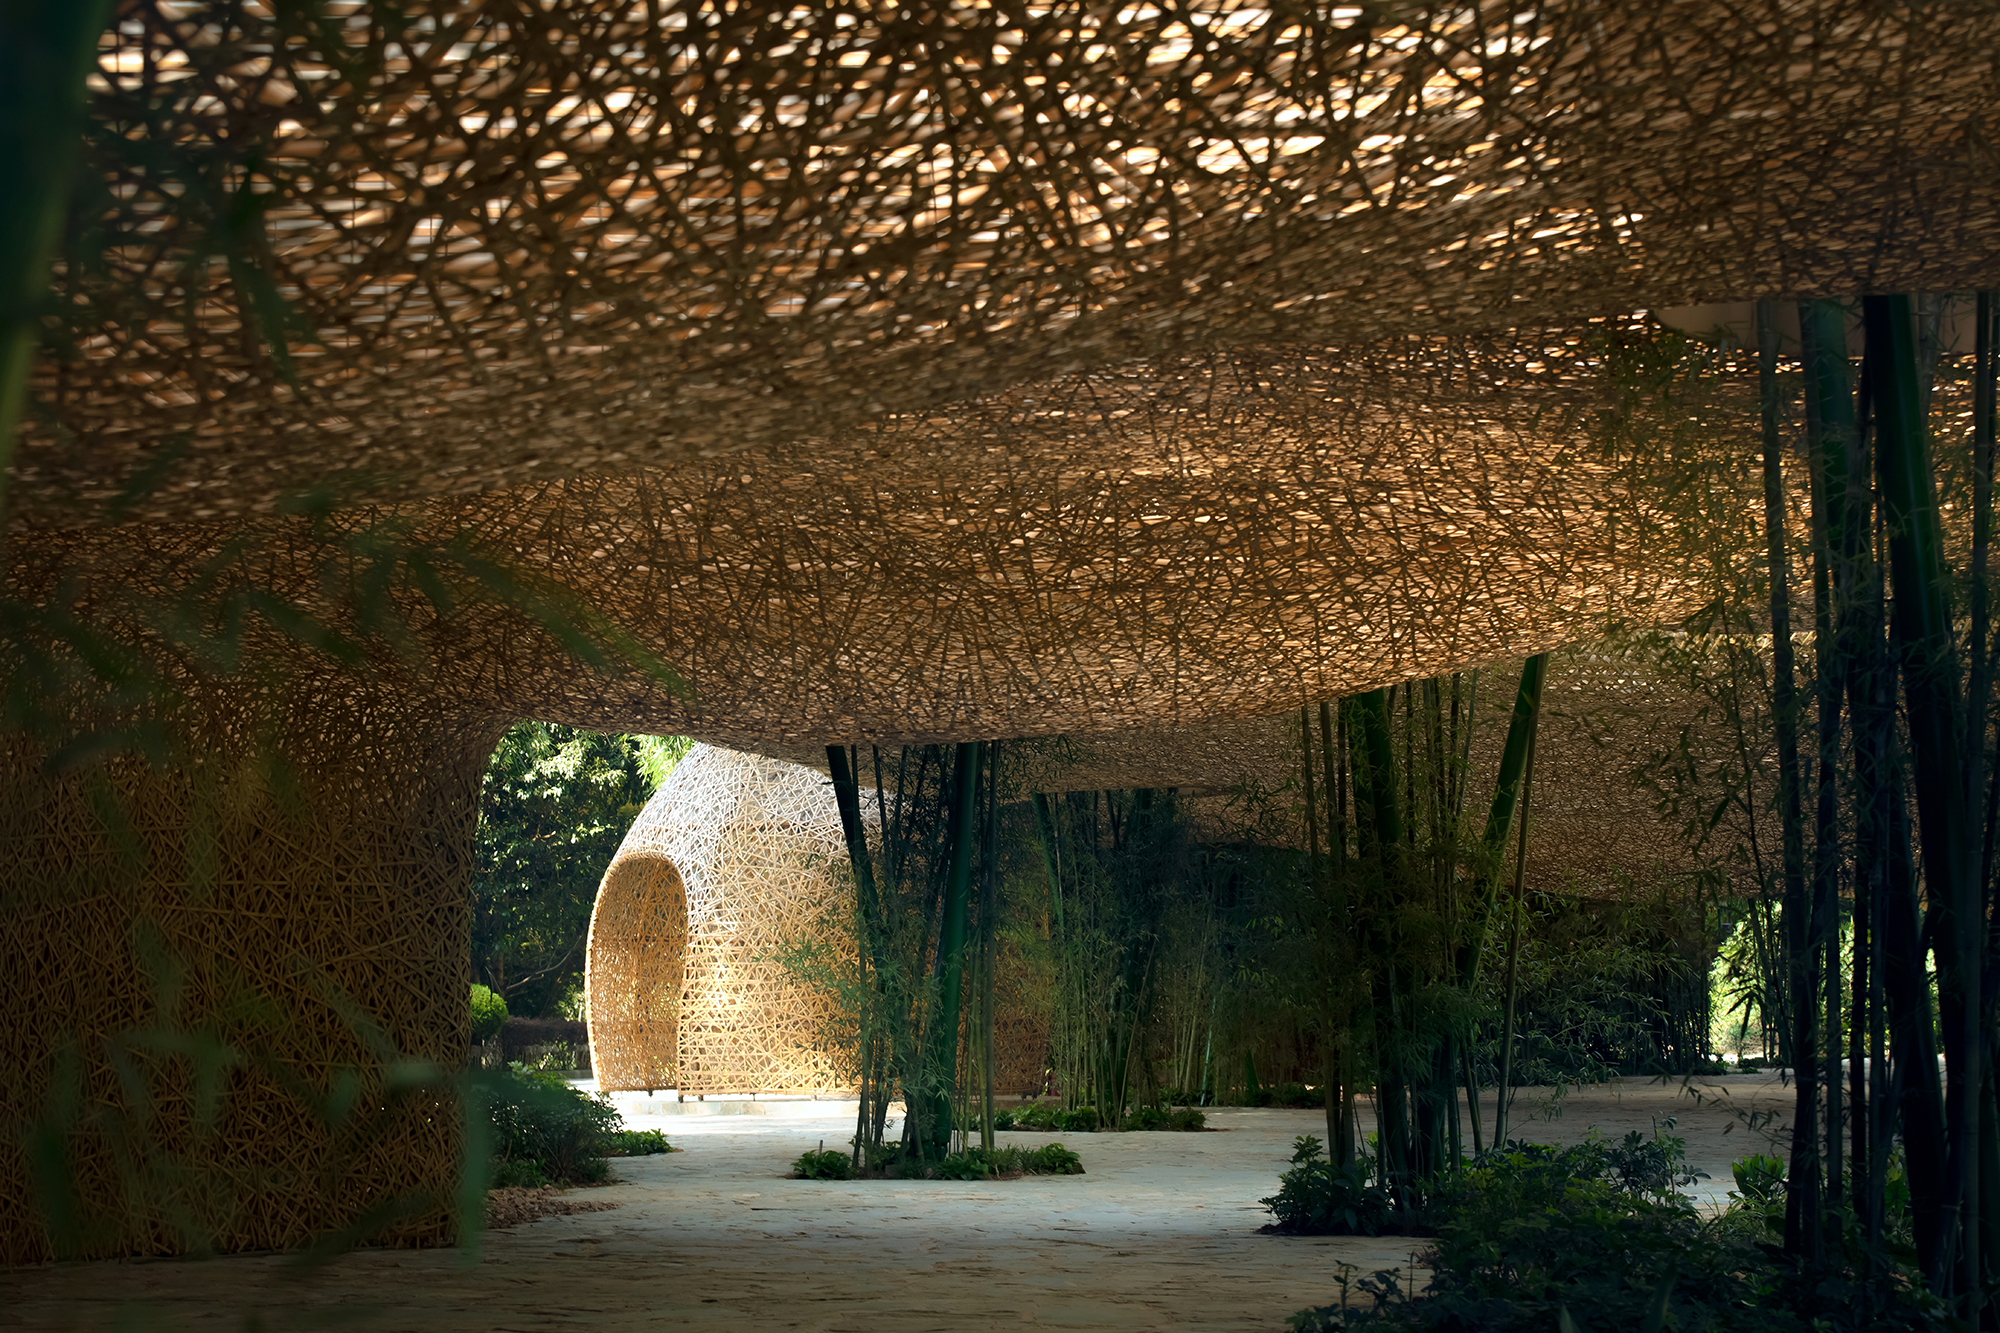 Bamboo Bamboo, Canopy and Pavilions, Impression Sanjie Liu by LLLab. Guilin, China. Photography by Arch-Exist Photography bamboo construction digital technologies